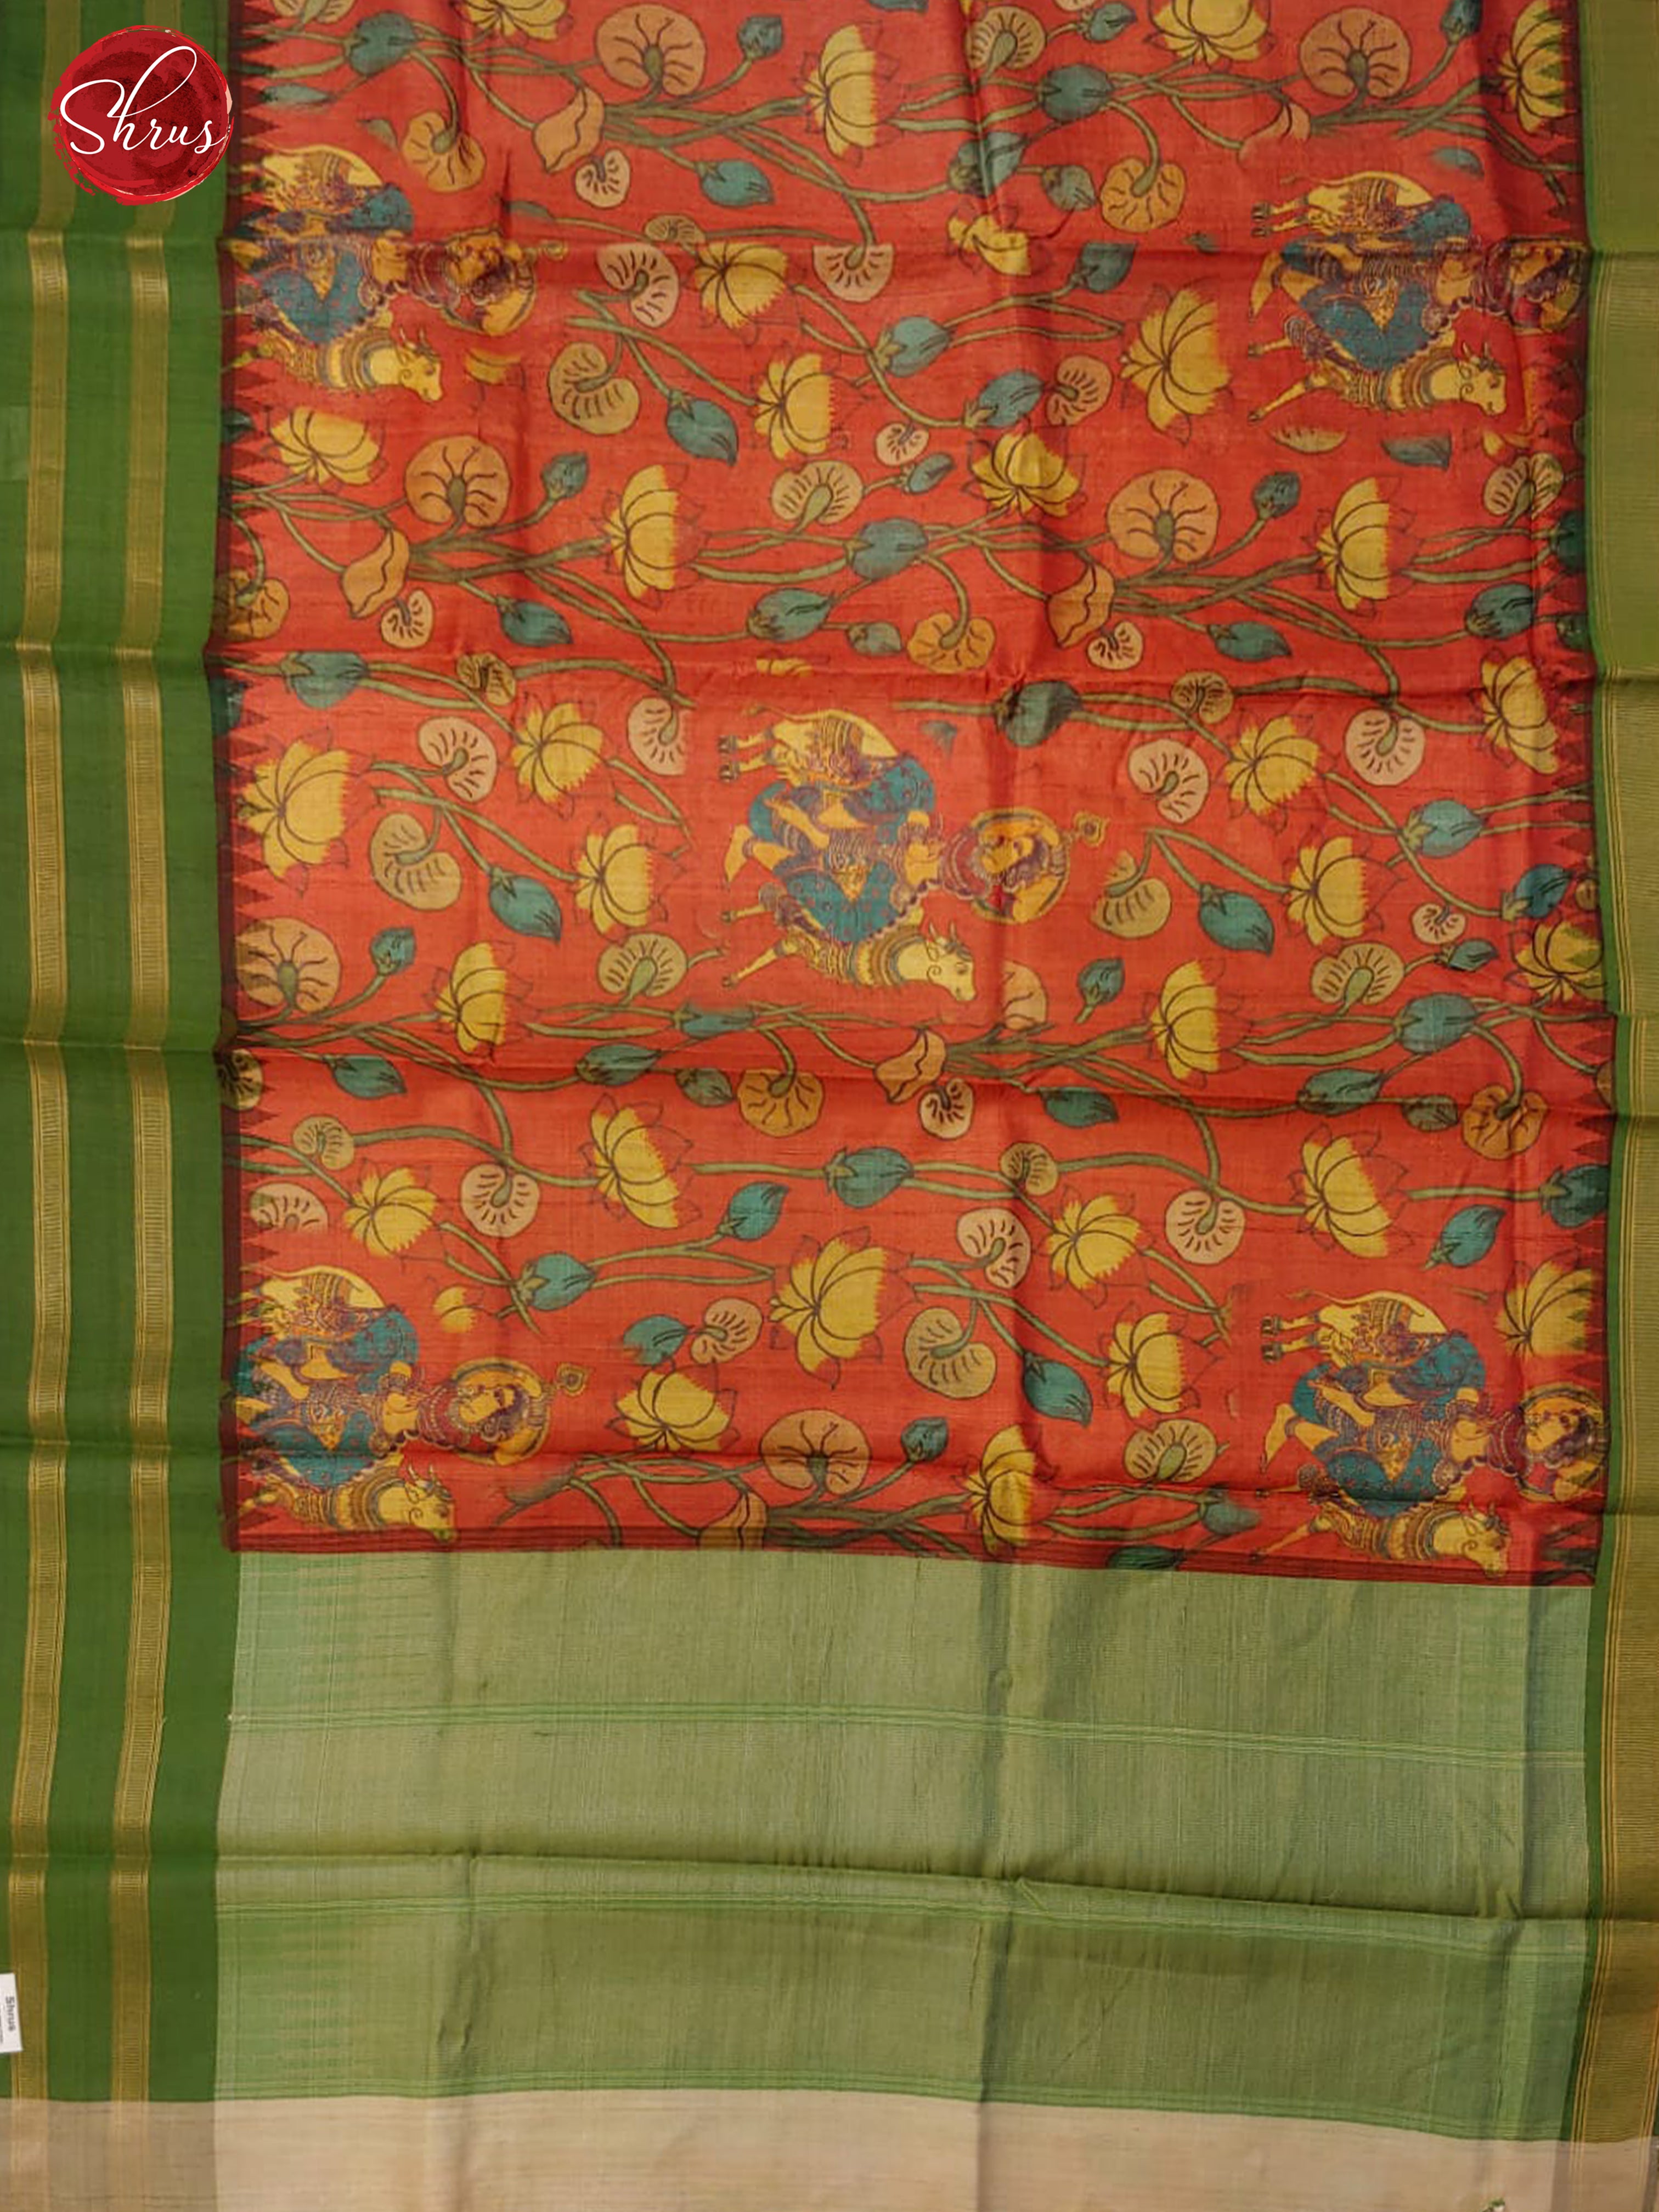 Red & Green - Tussar with floral print on the body & Zari Border - Shop on ShrusEternity.com